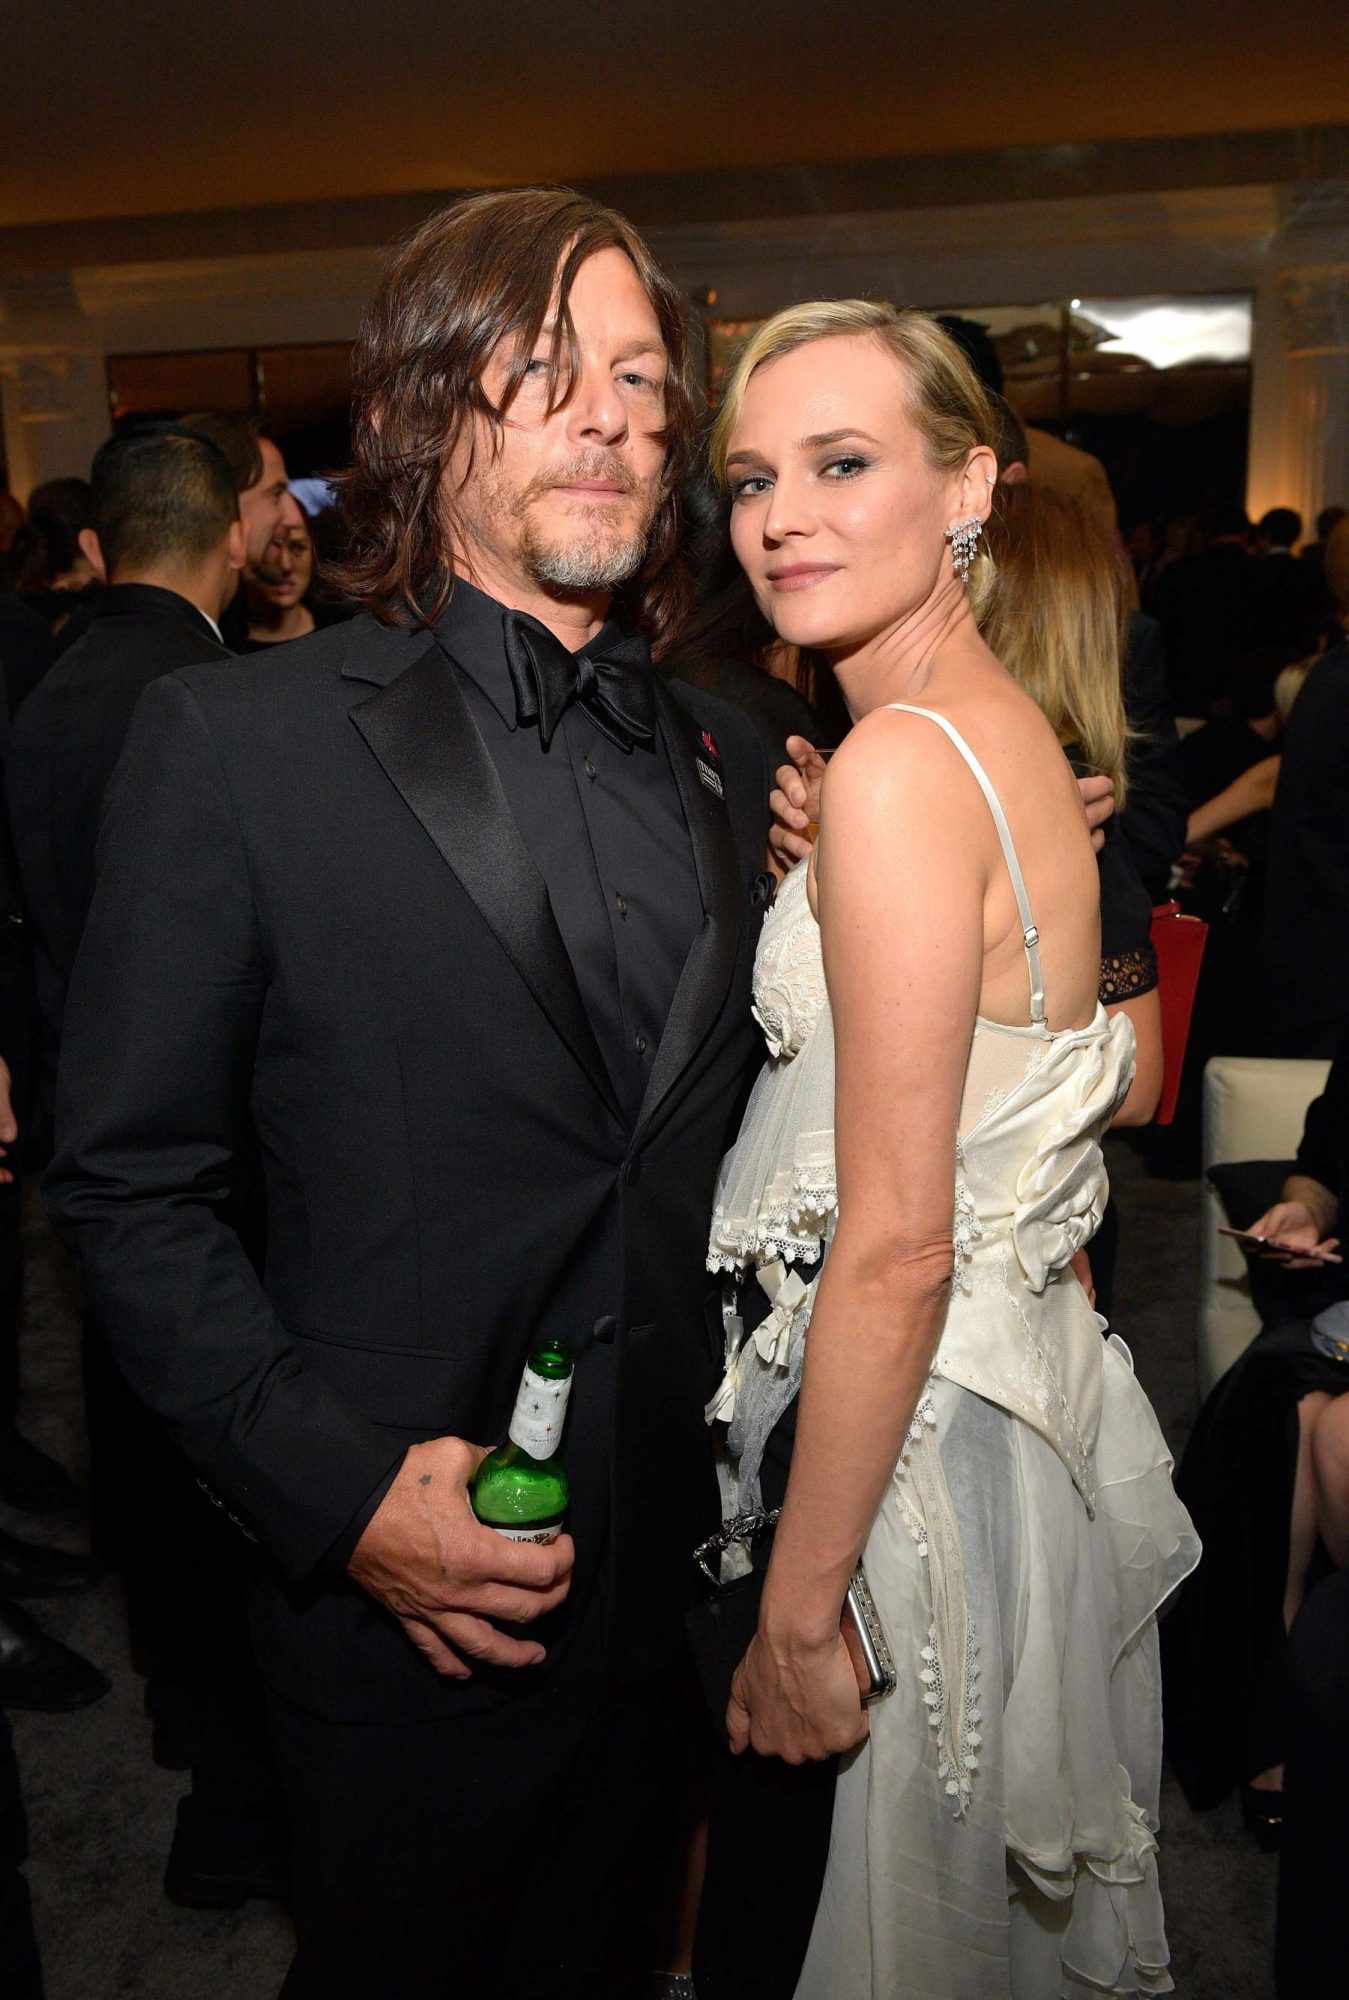 Norman Reedus (The Walking Dead) and Diane Kruger (In the Fade)